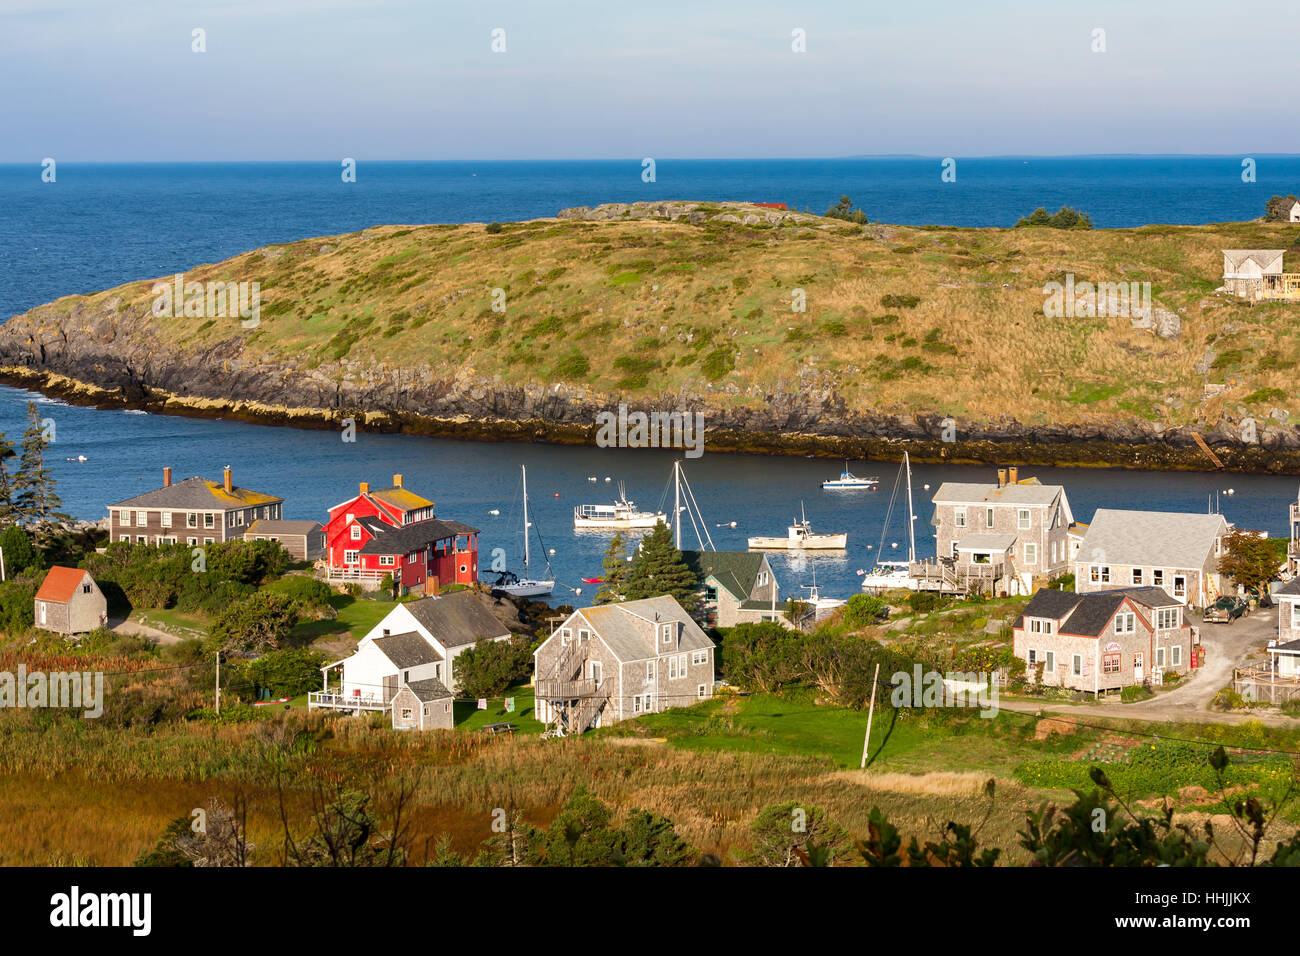 View of Monhegan Island in Maine with Manana Island in the background. Stock Photo